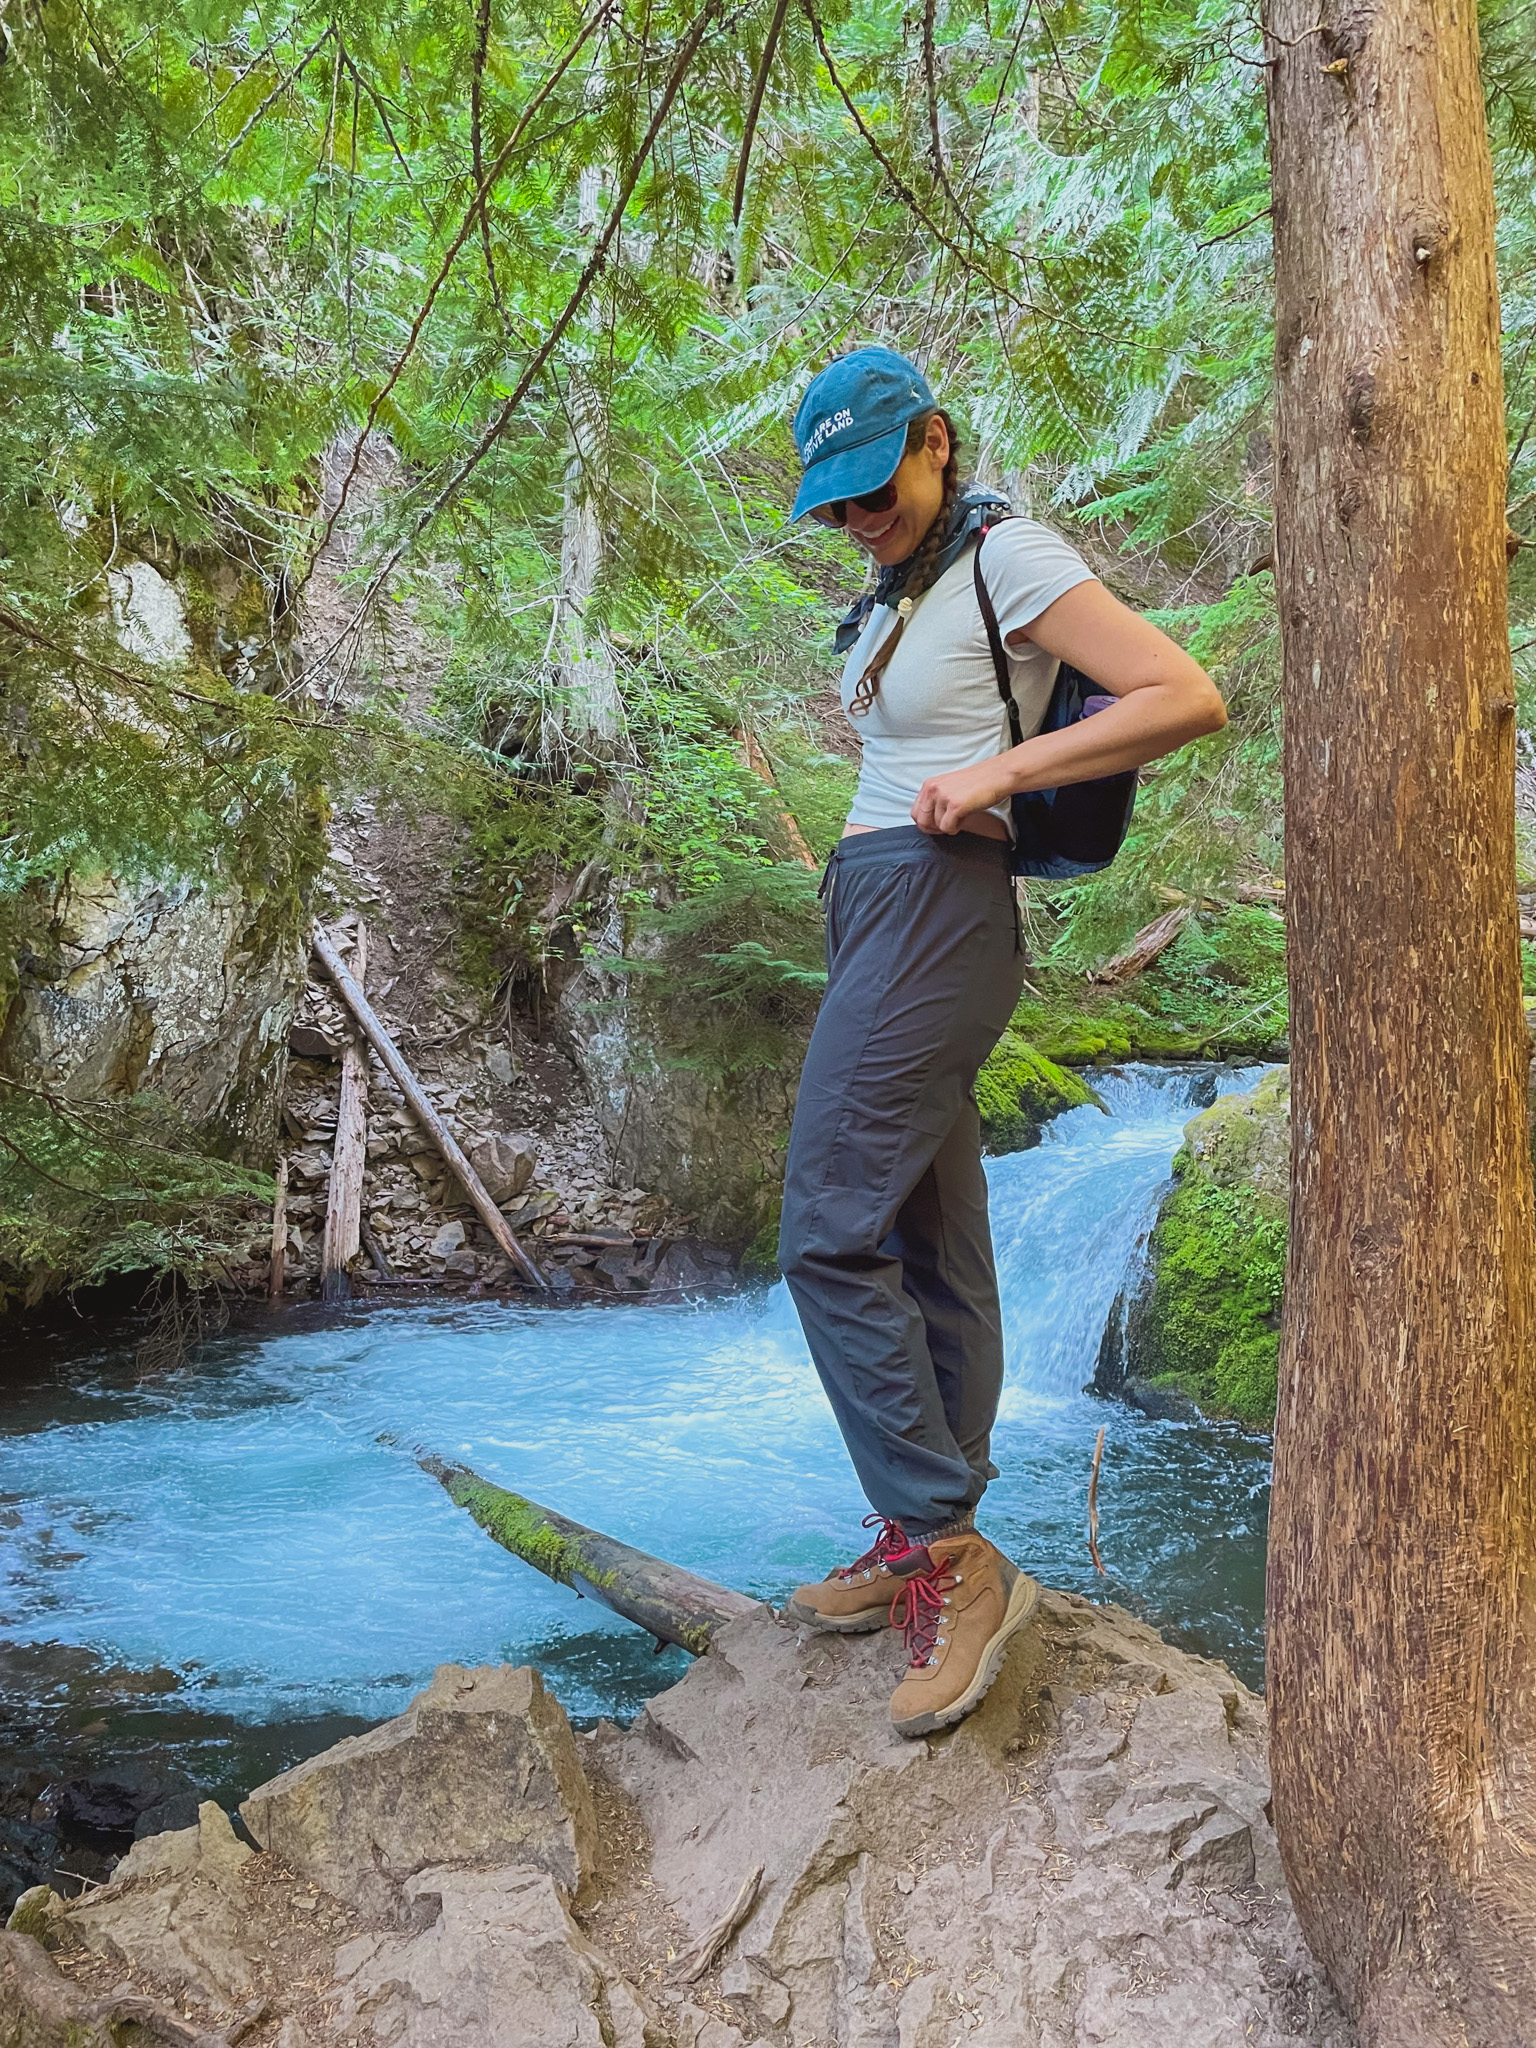 The Best Kühl Womens Pants For Travel & Hiking (Product Review